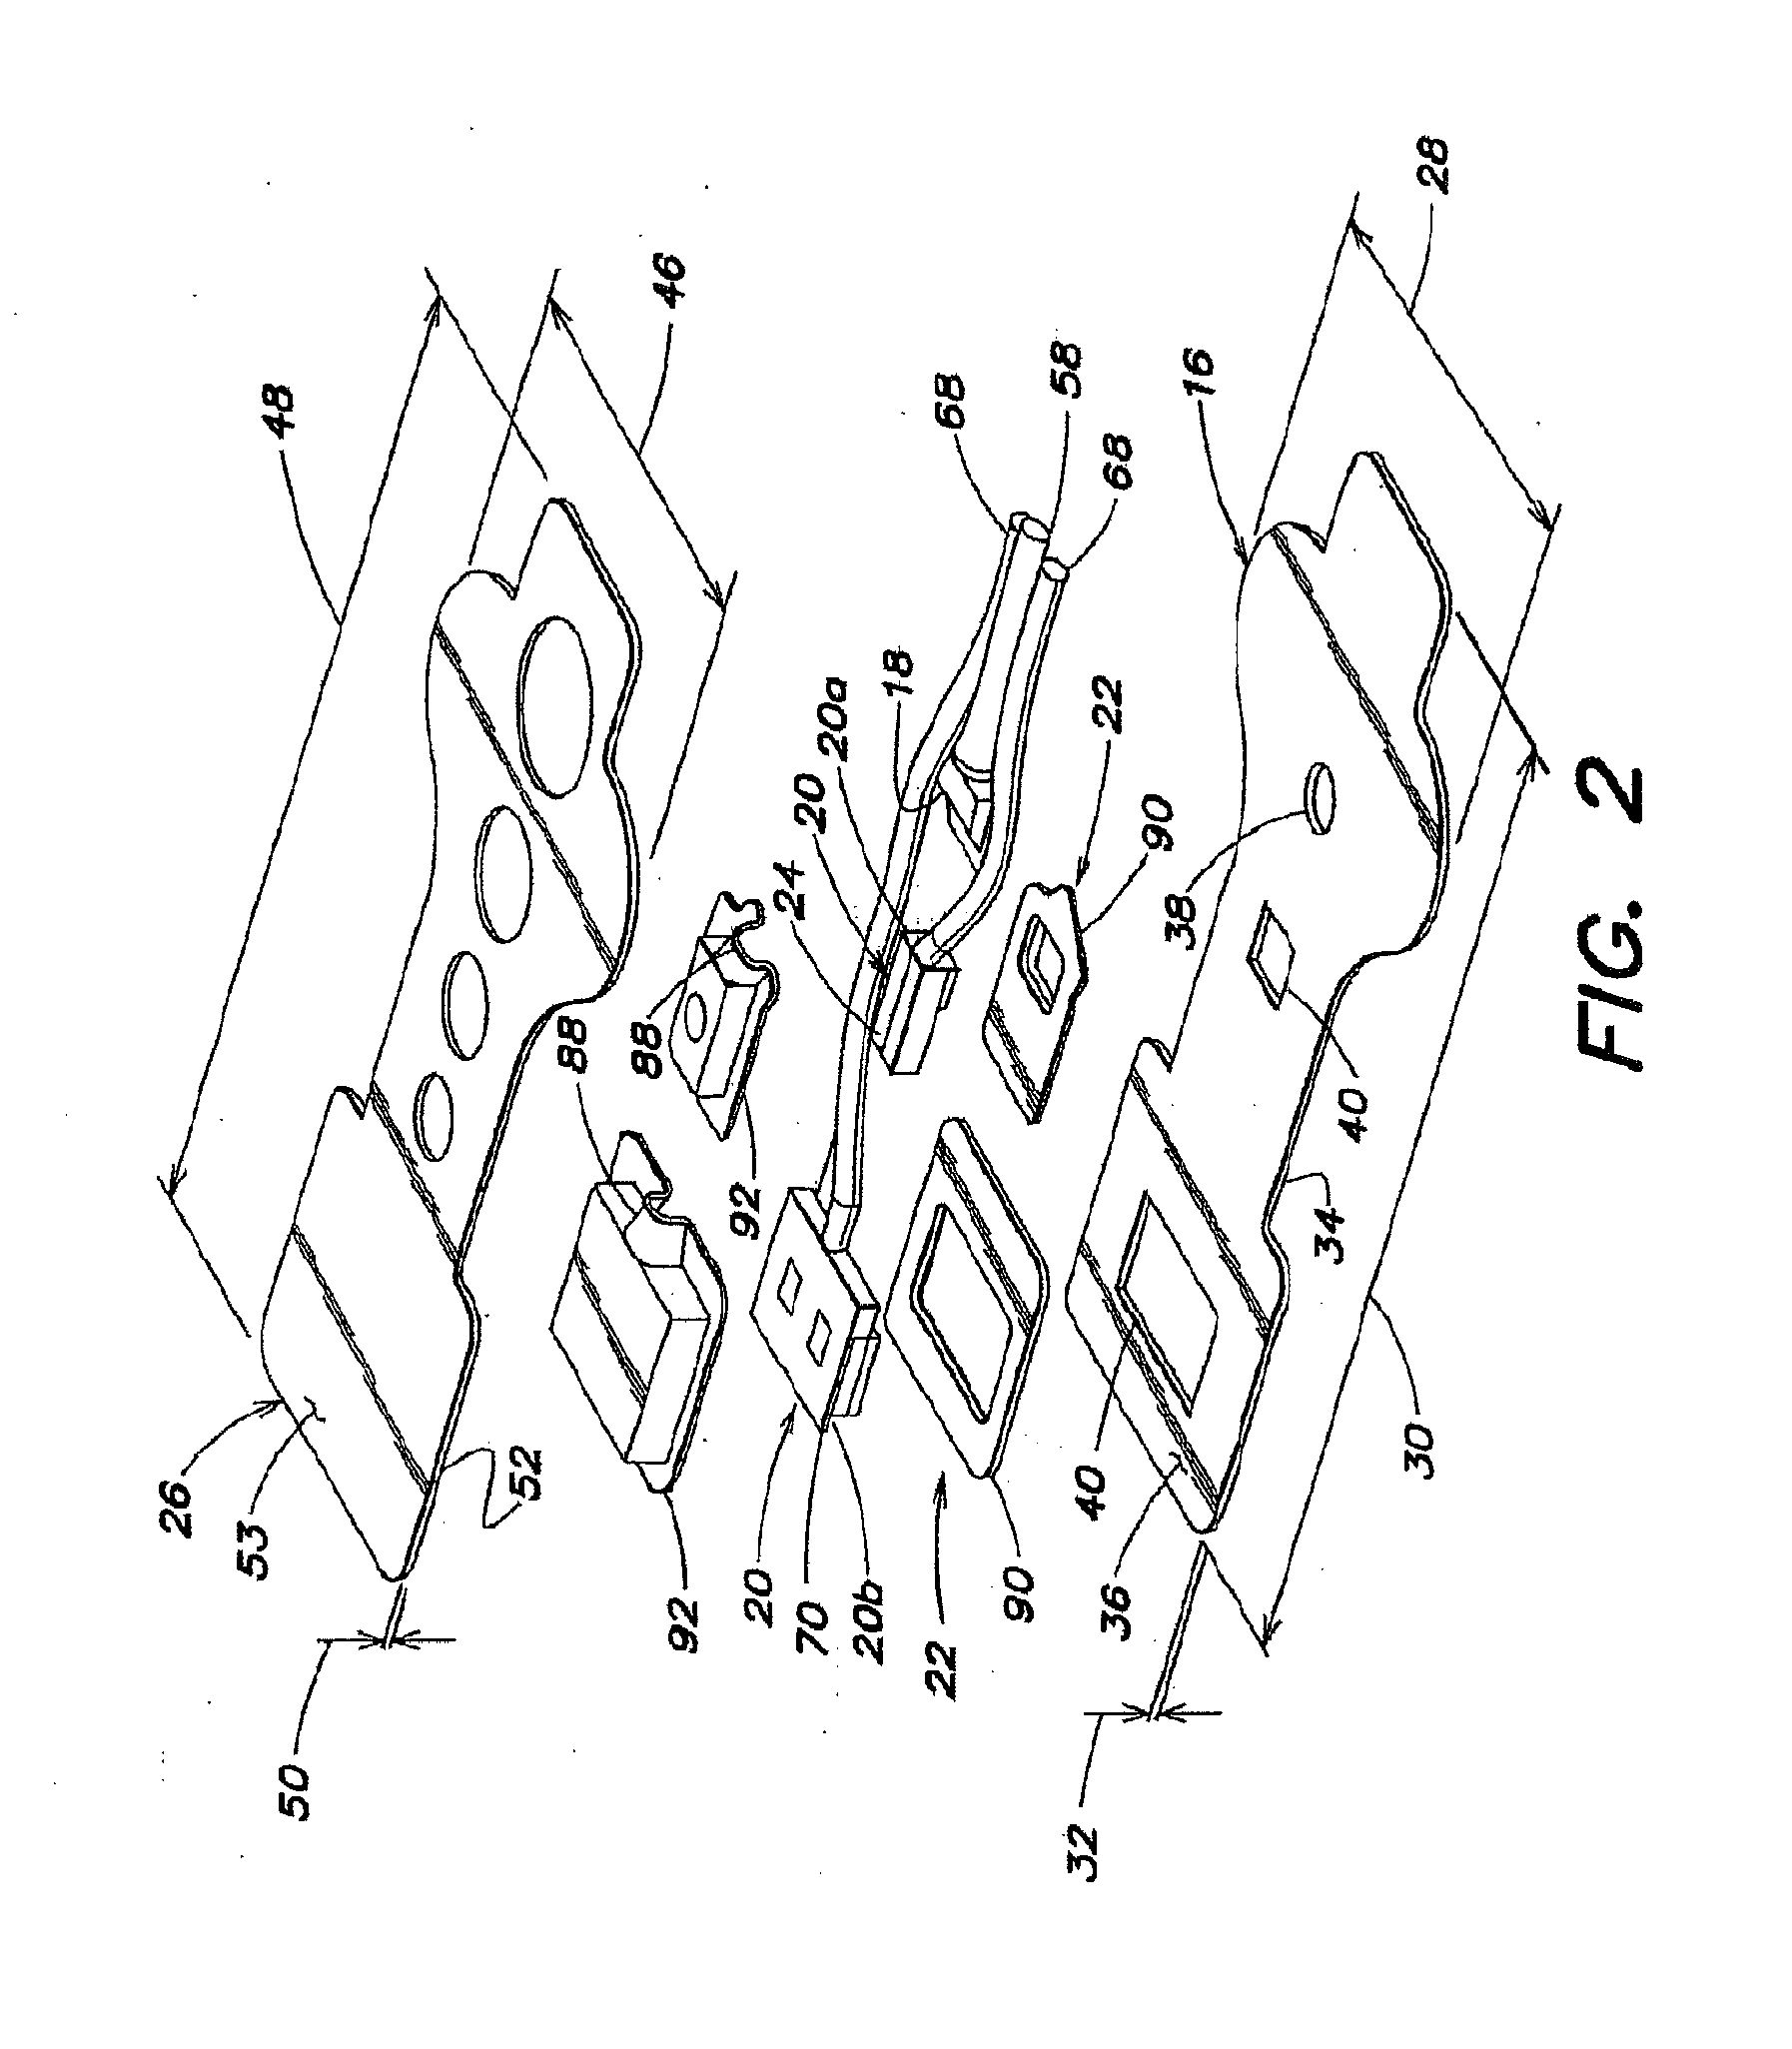 Nirs sensor assembly including electrically conductive and optically transparent EMI shielding